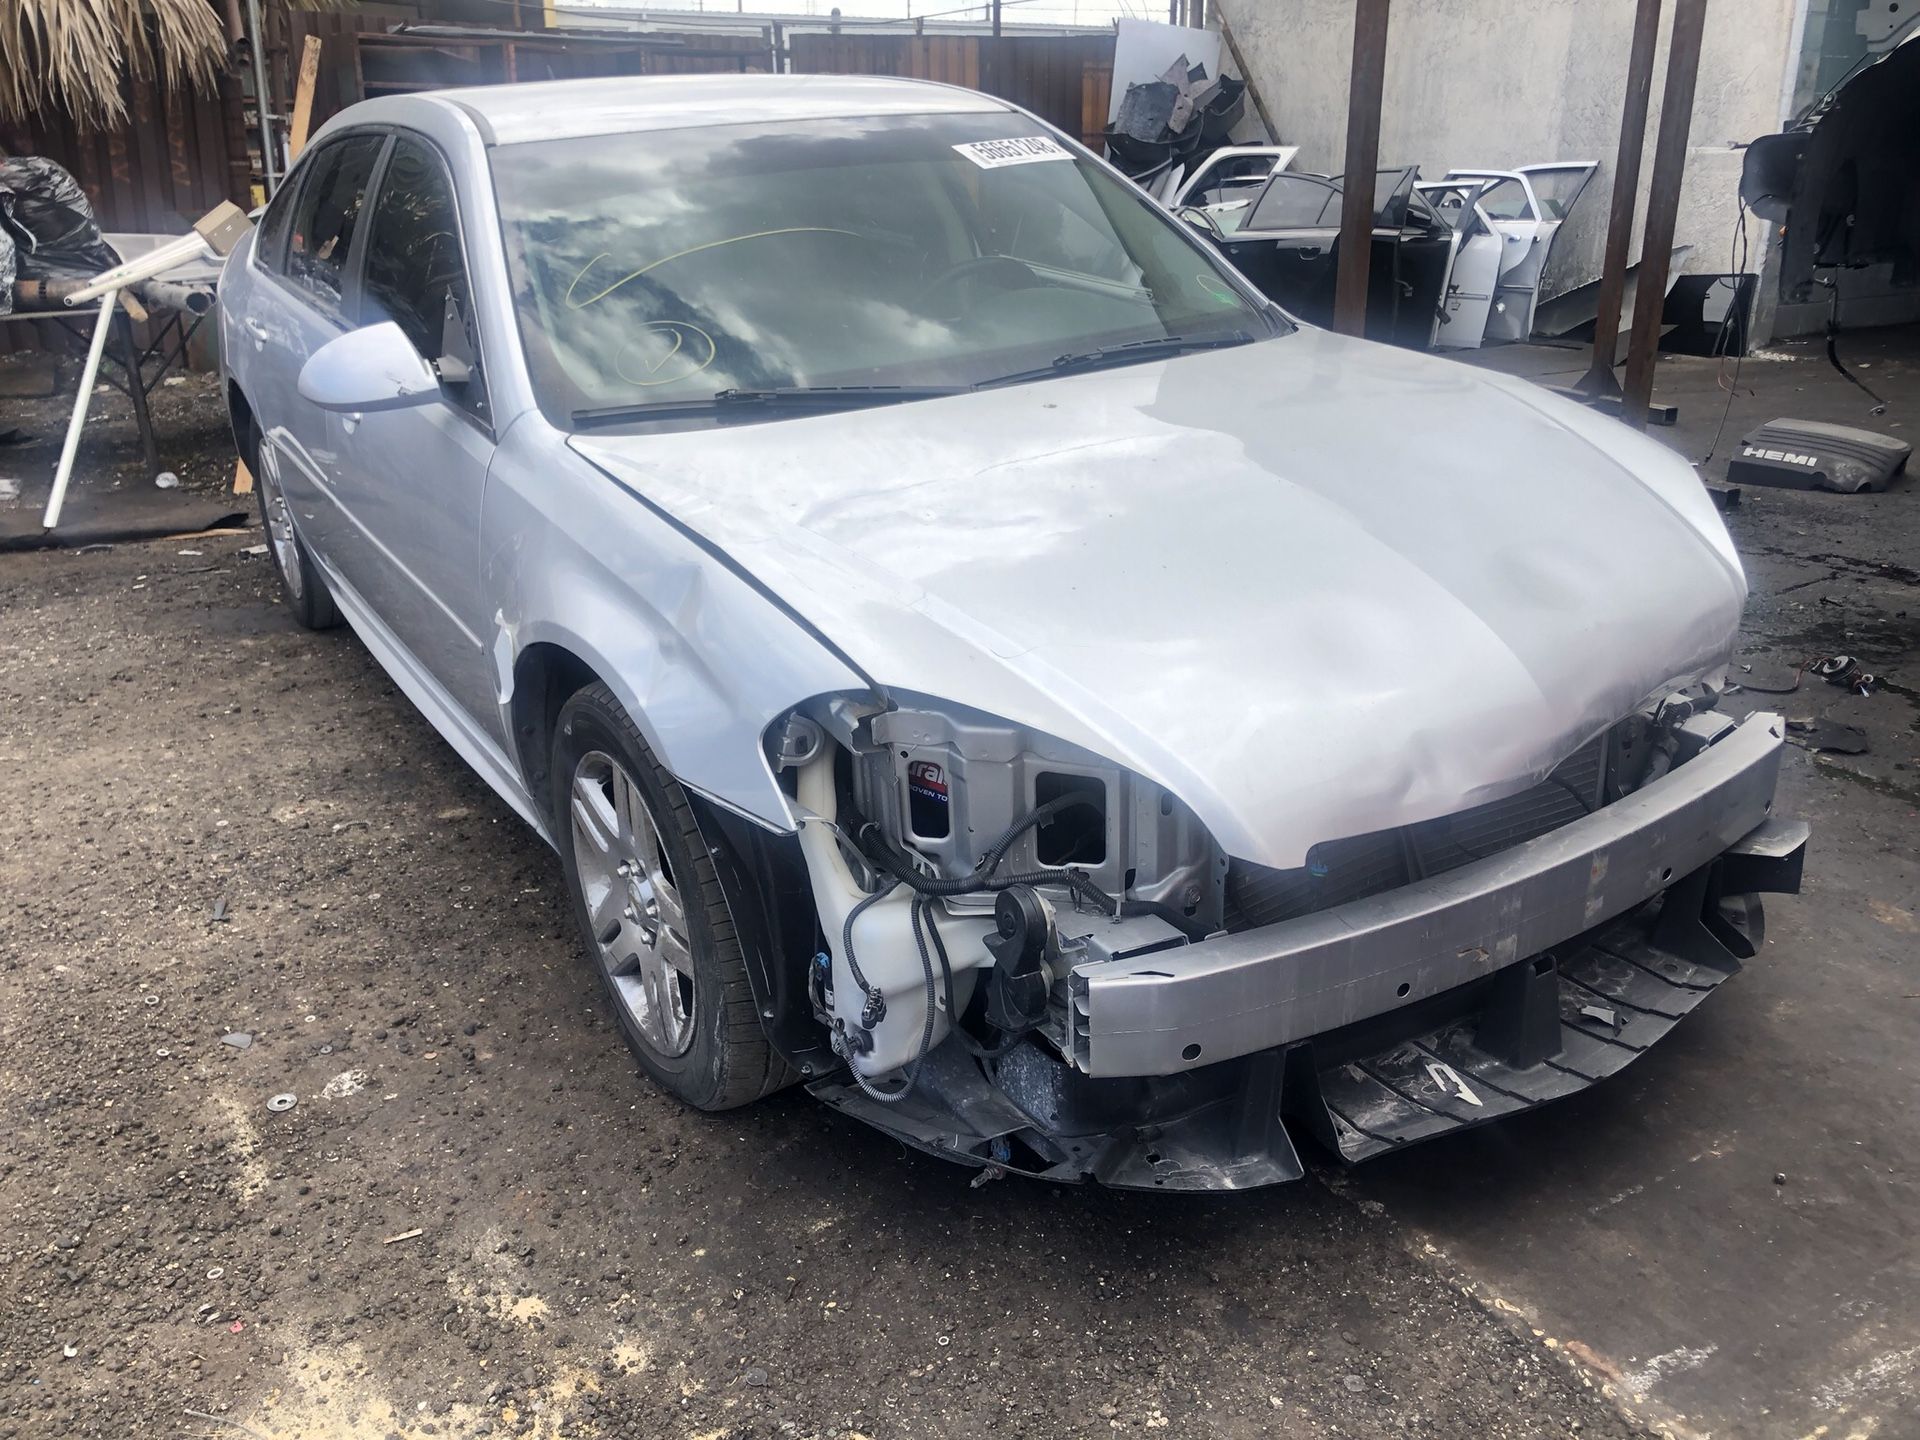 2010 Chevy Impala parts only